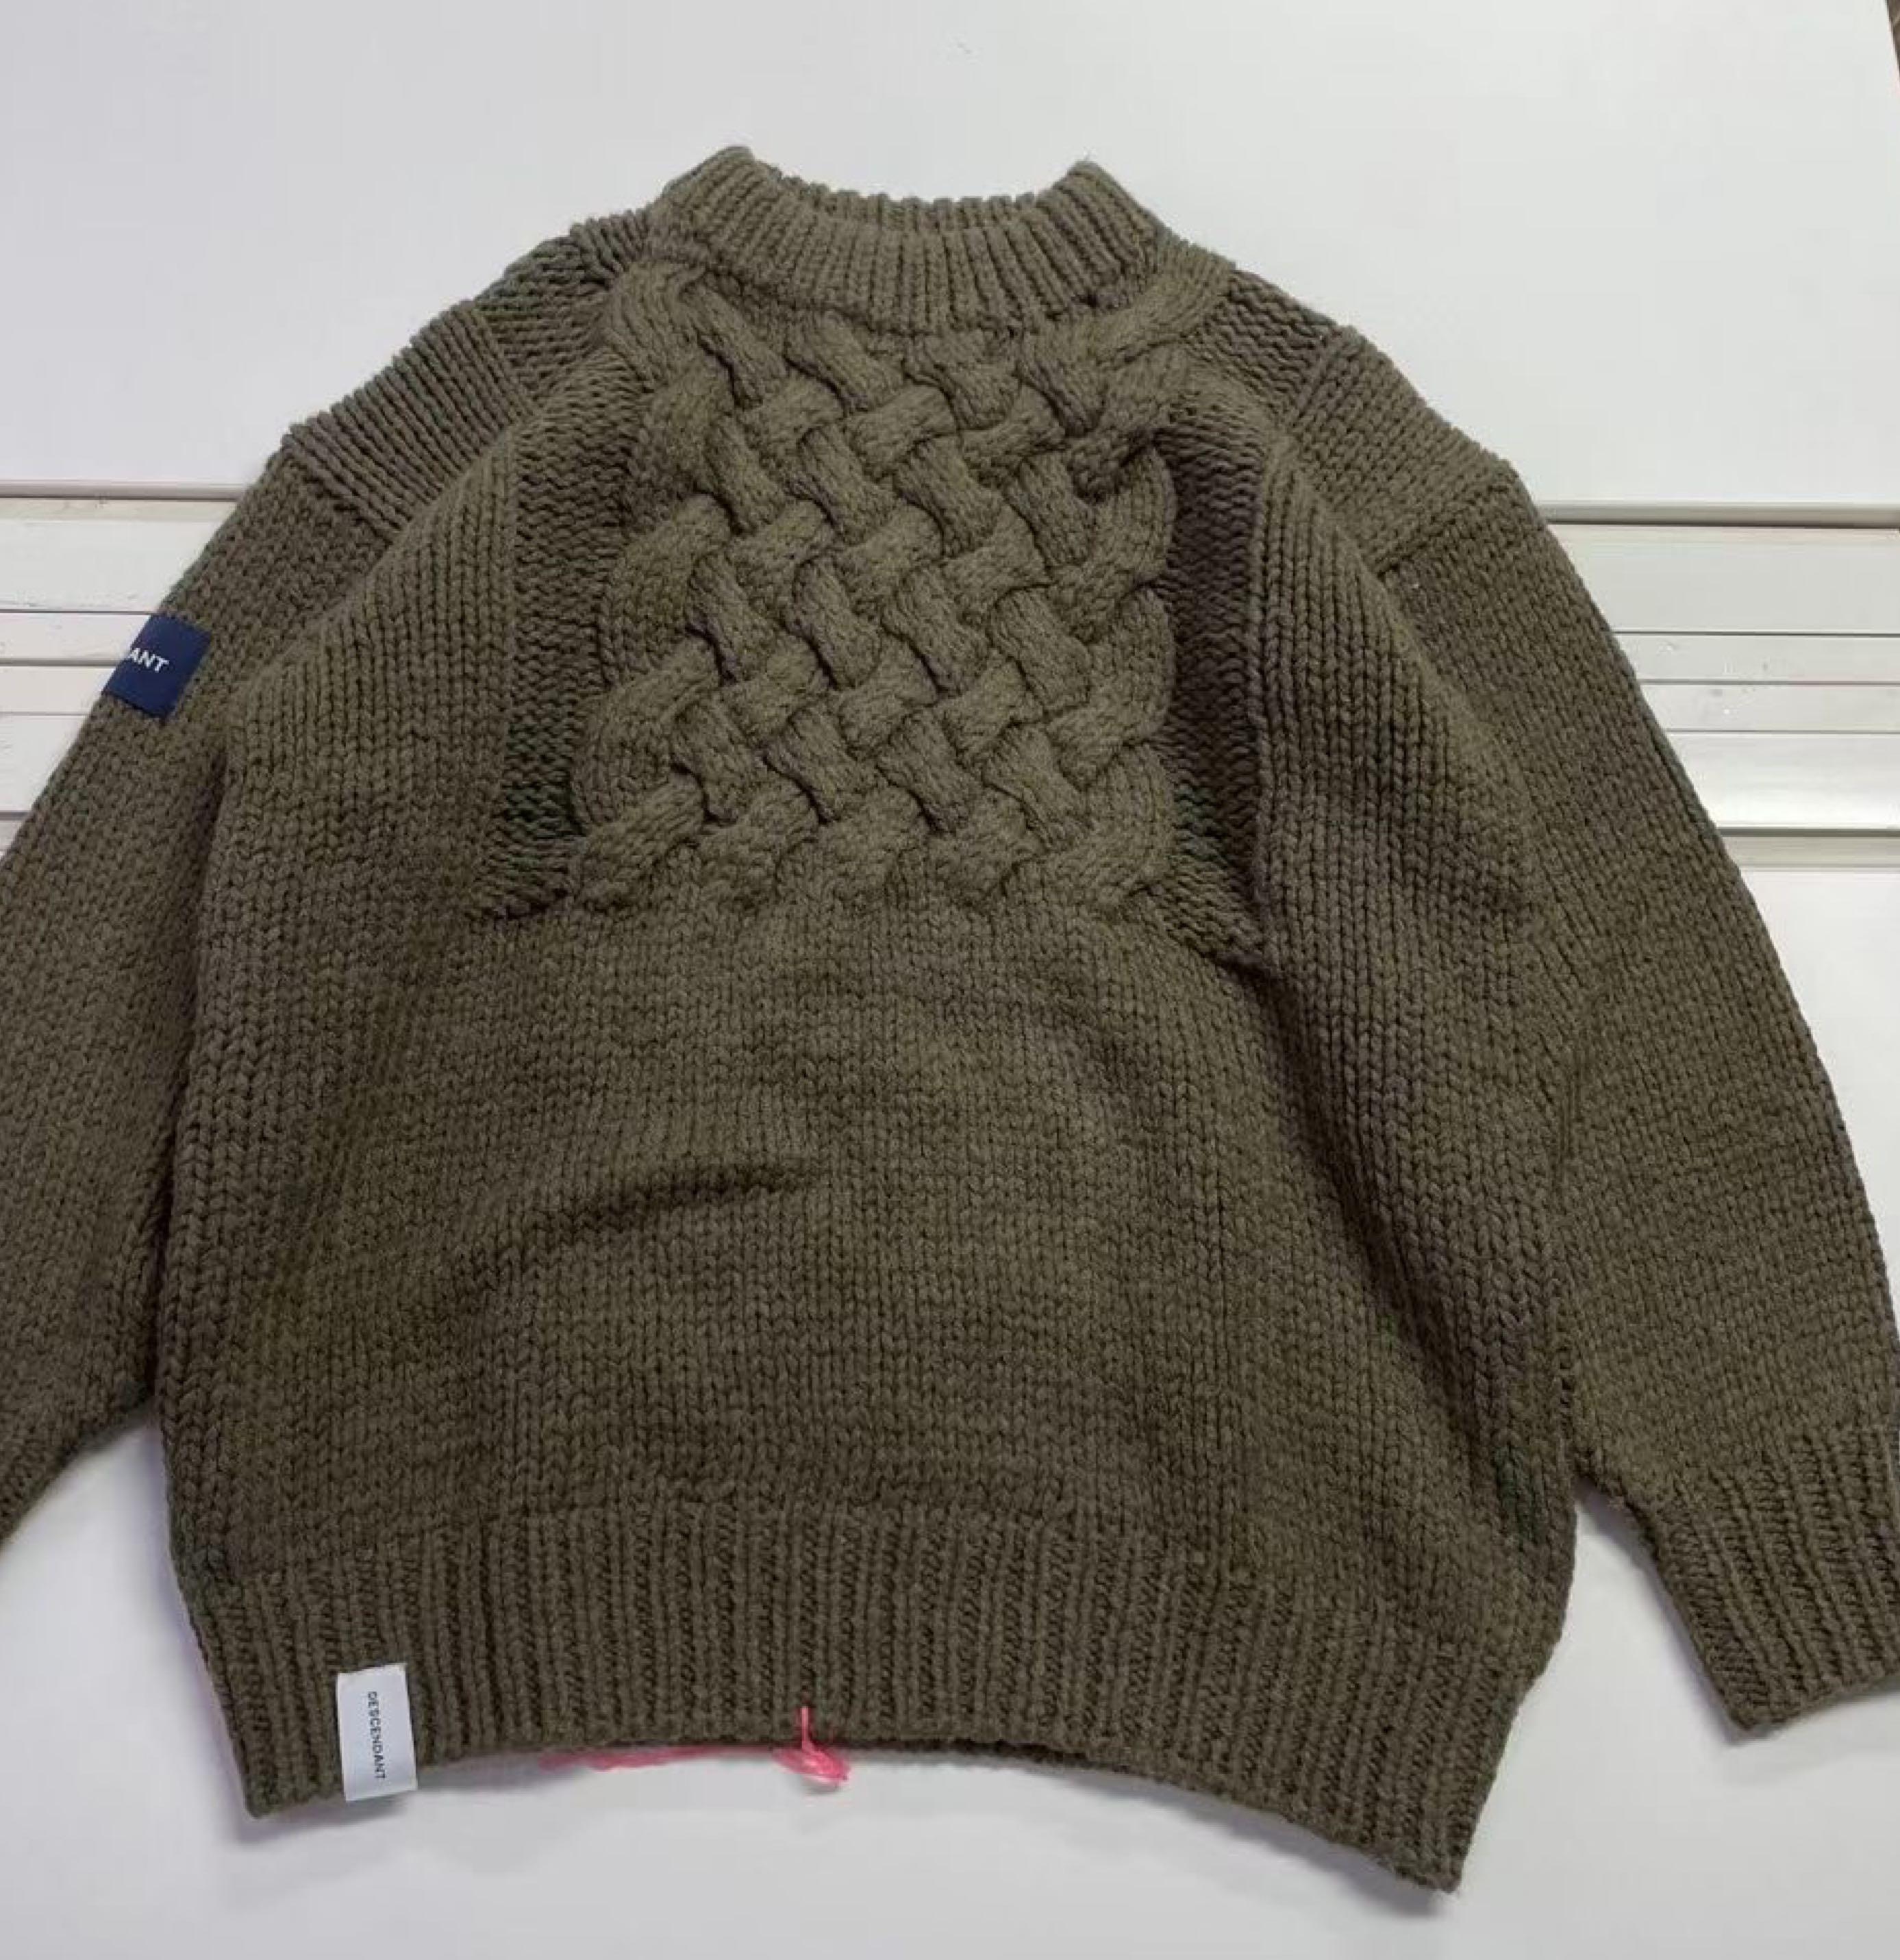 FADED CABLE KNIT